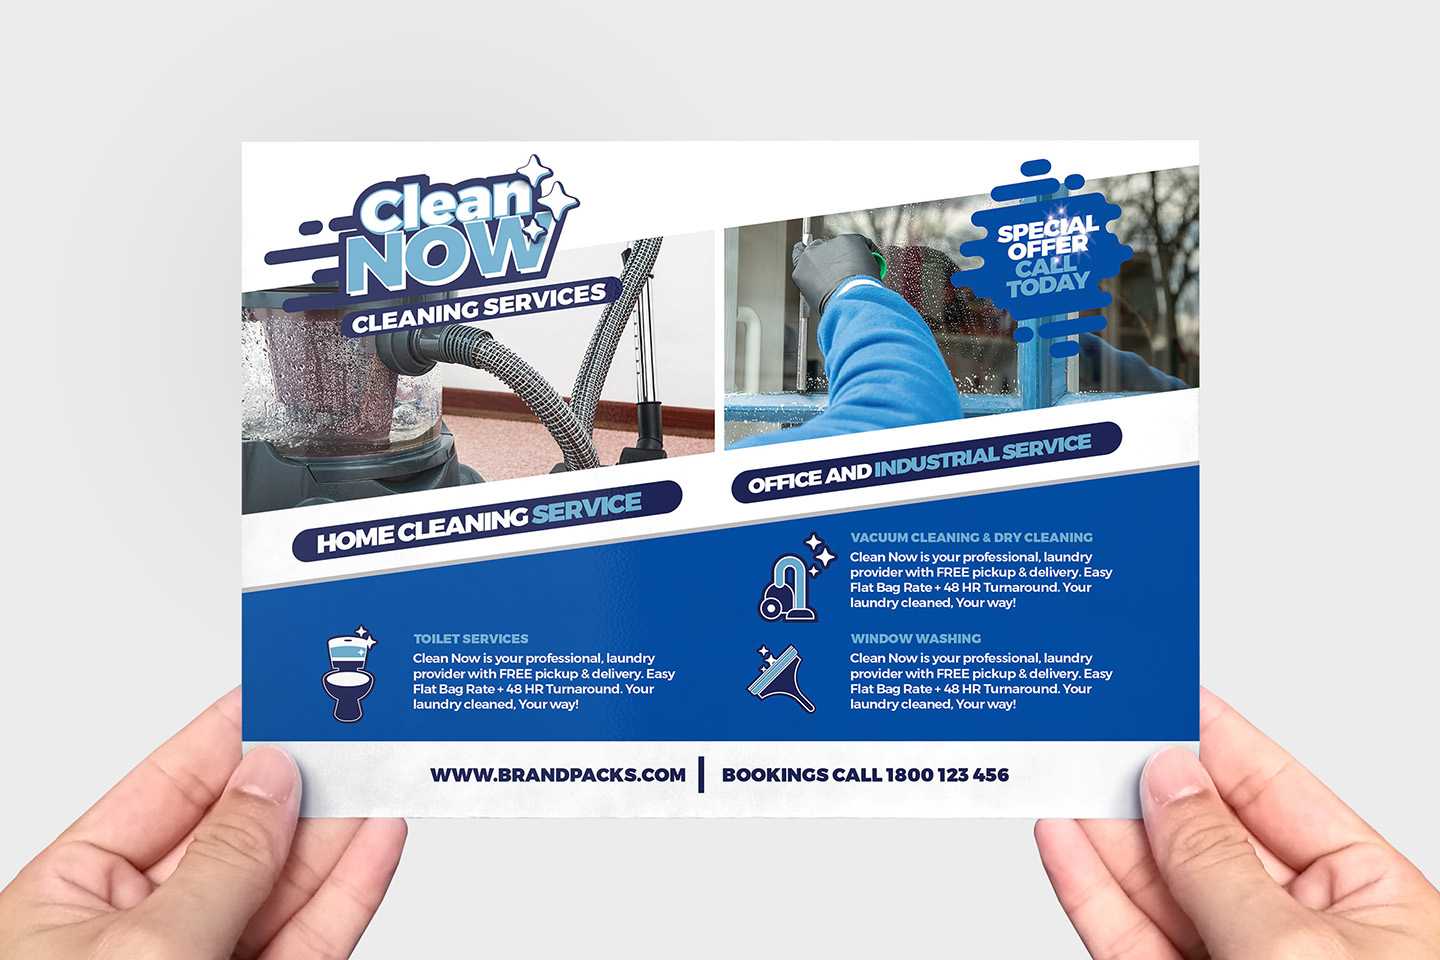 Cleaning Service Flyer Template In Psd, Ai & Vector – Brandpacks With Regard To Cleaning Company Flyers Template